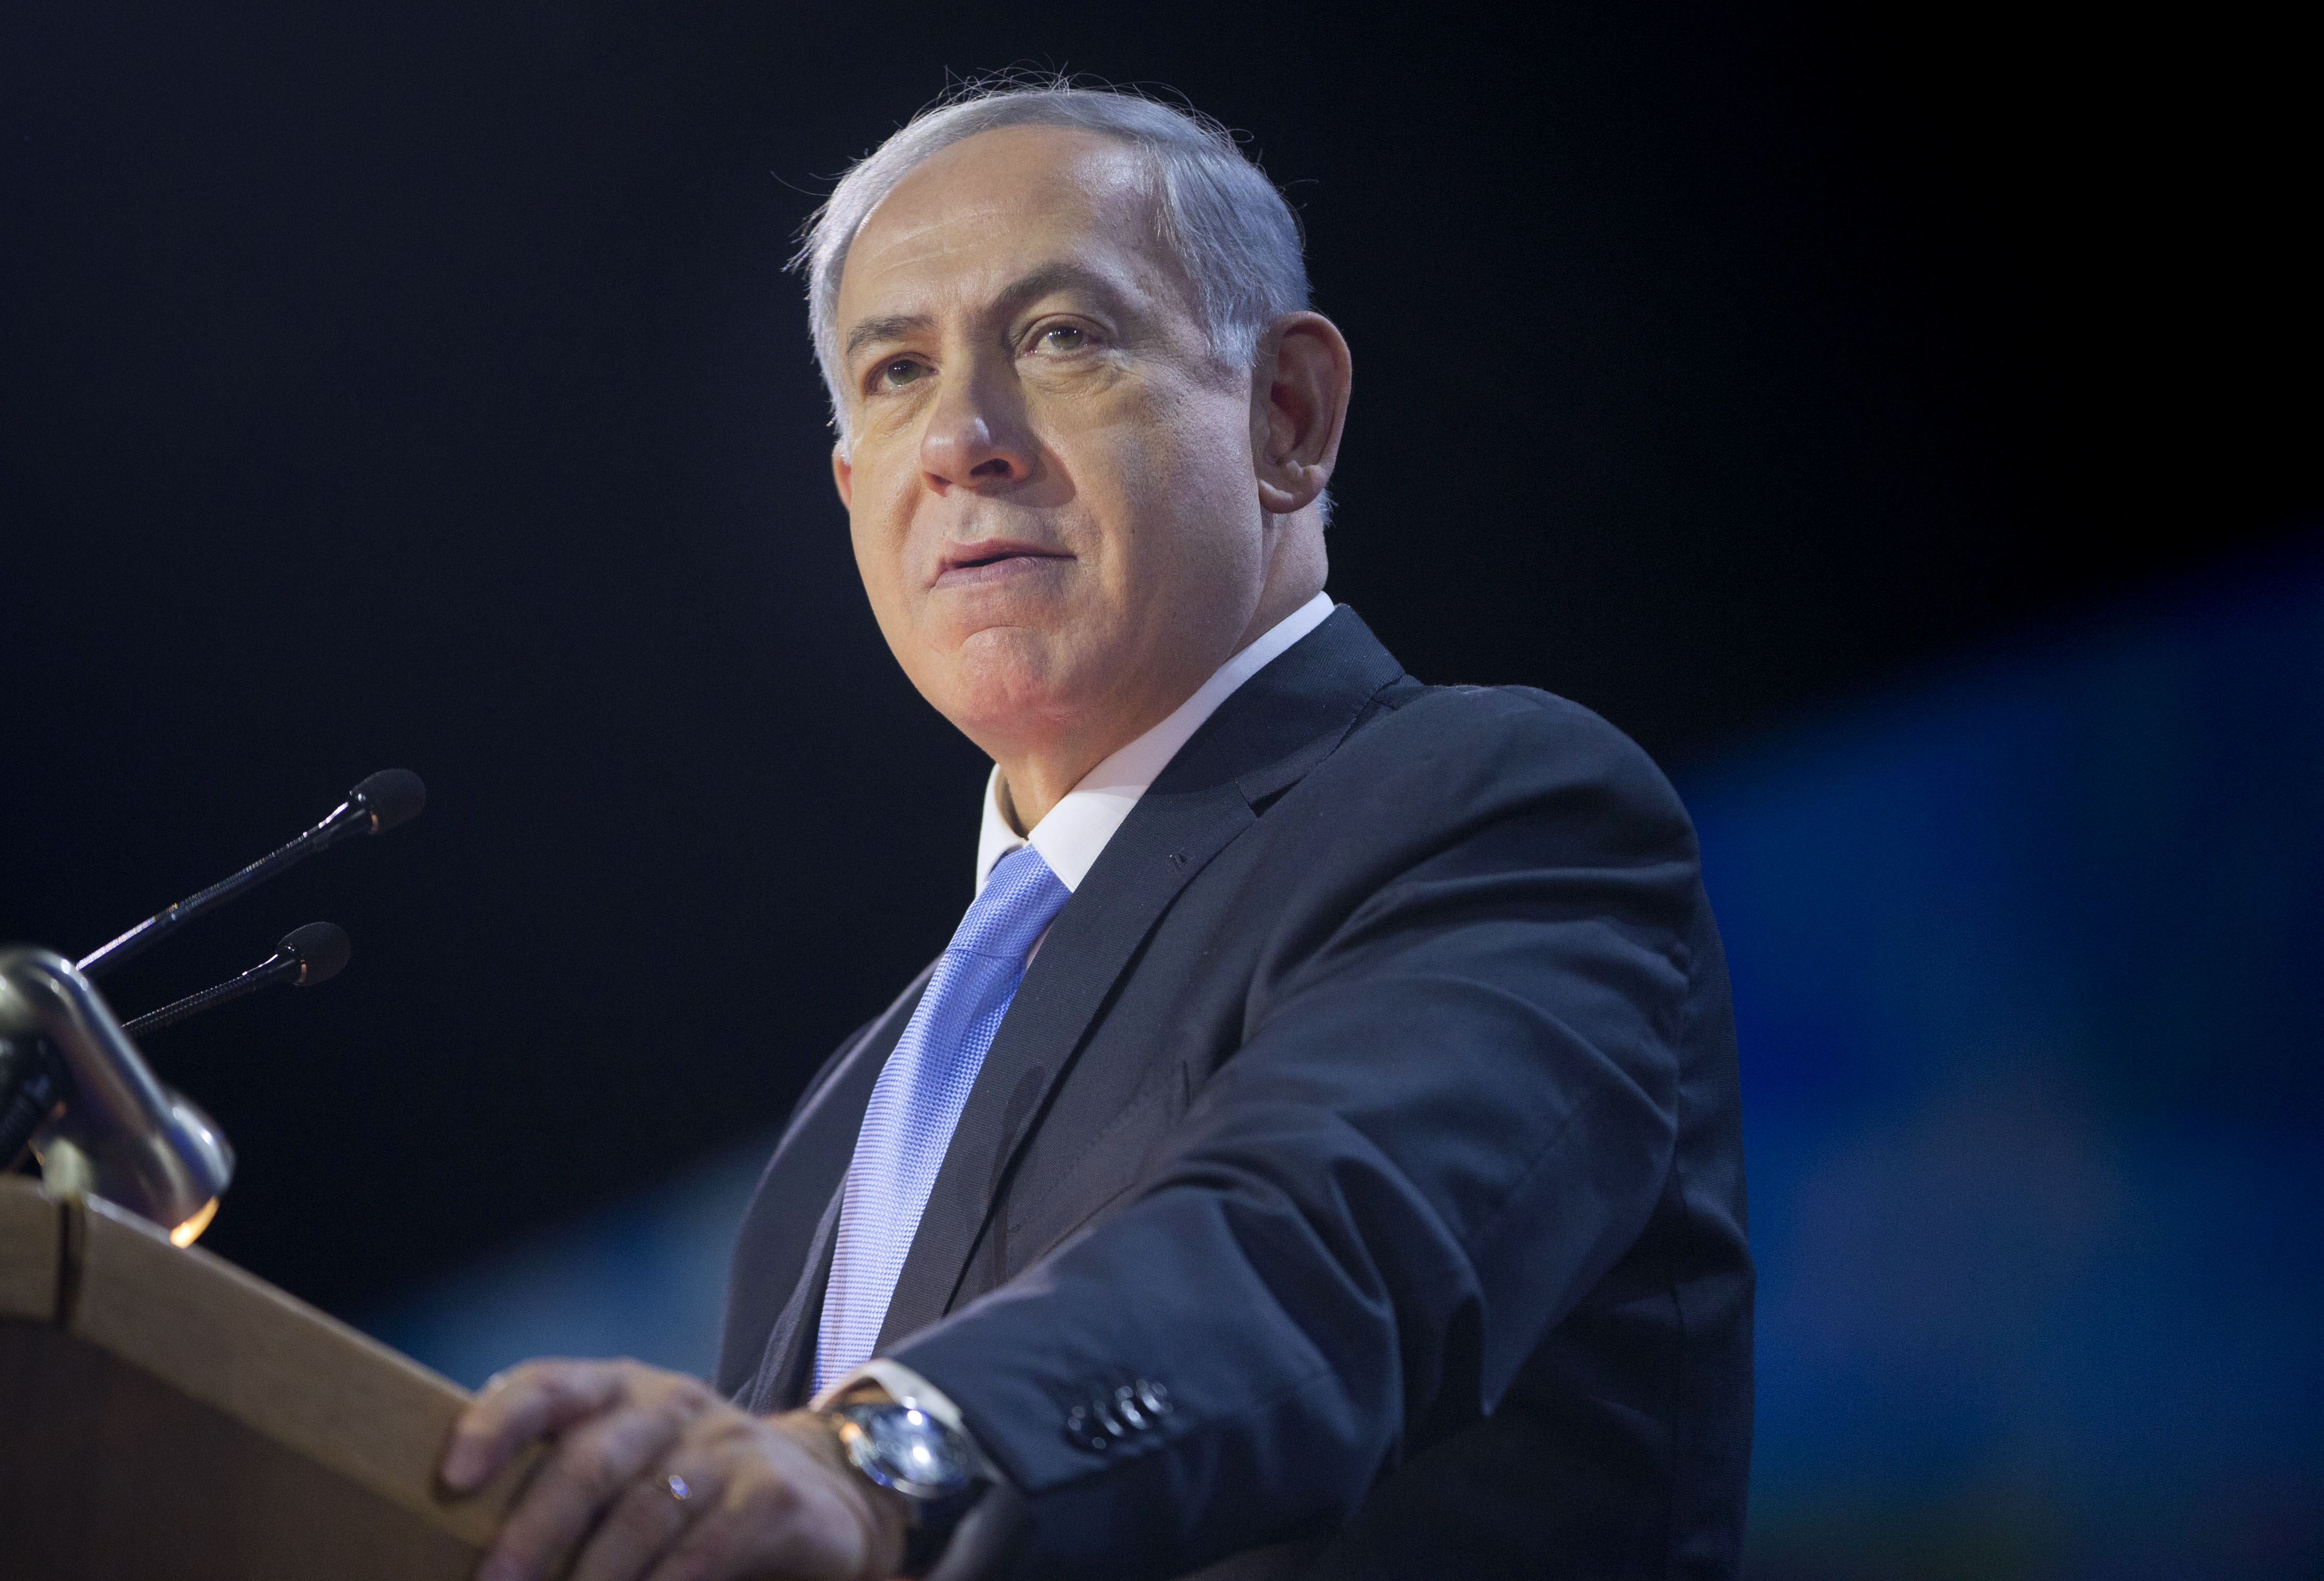 Israeli Prime Minister Benjamin Netanyahu speaks at the American Israel Public Affairs Committee (AIPAC) Policy Conference in Washington on March 2, 2015.